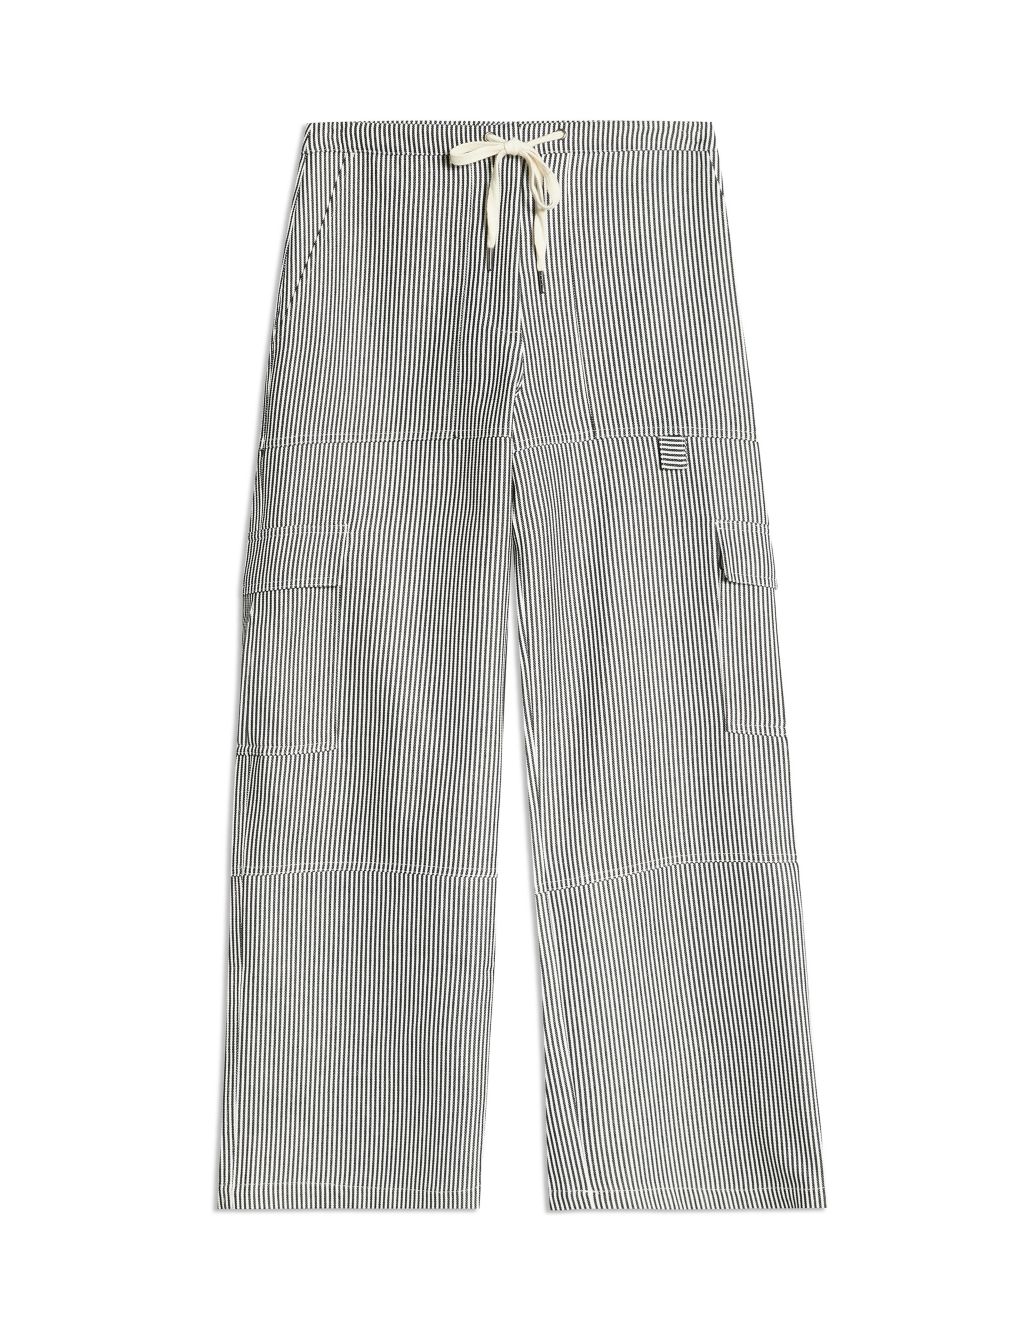 Cotton Blend Cargo Striped Trousers 1 of 4